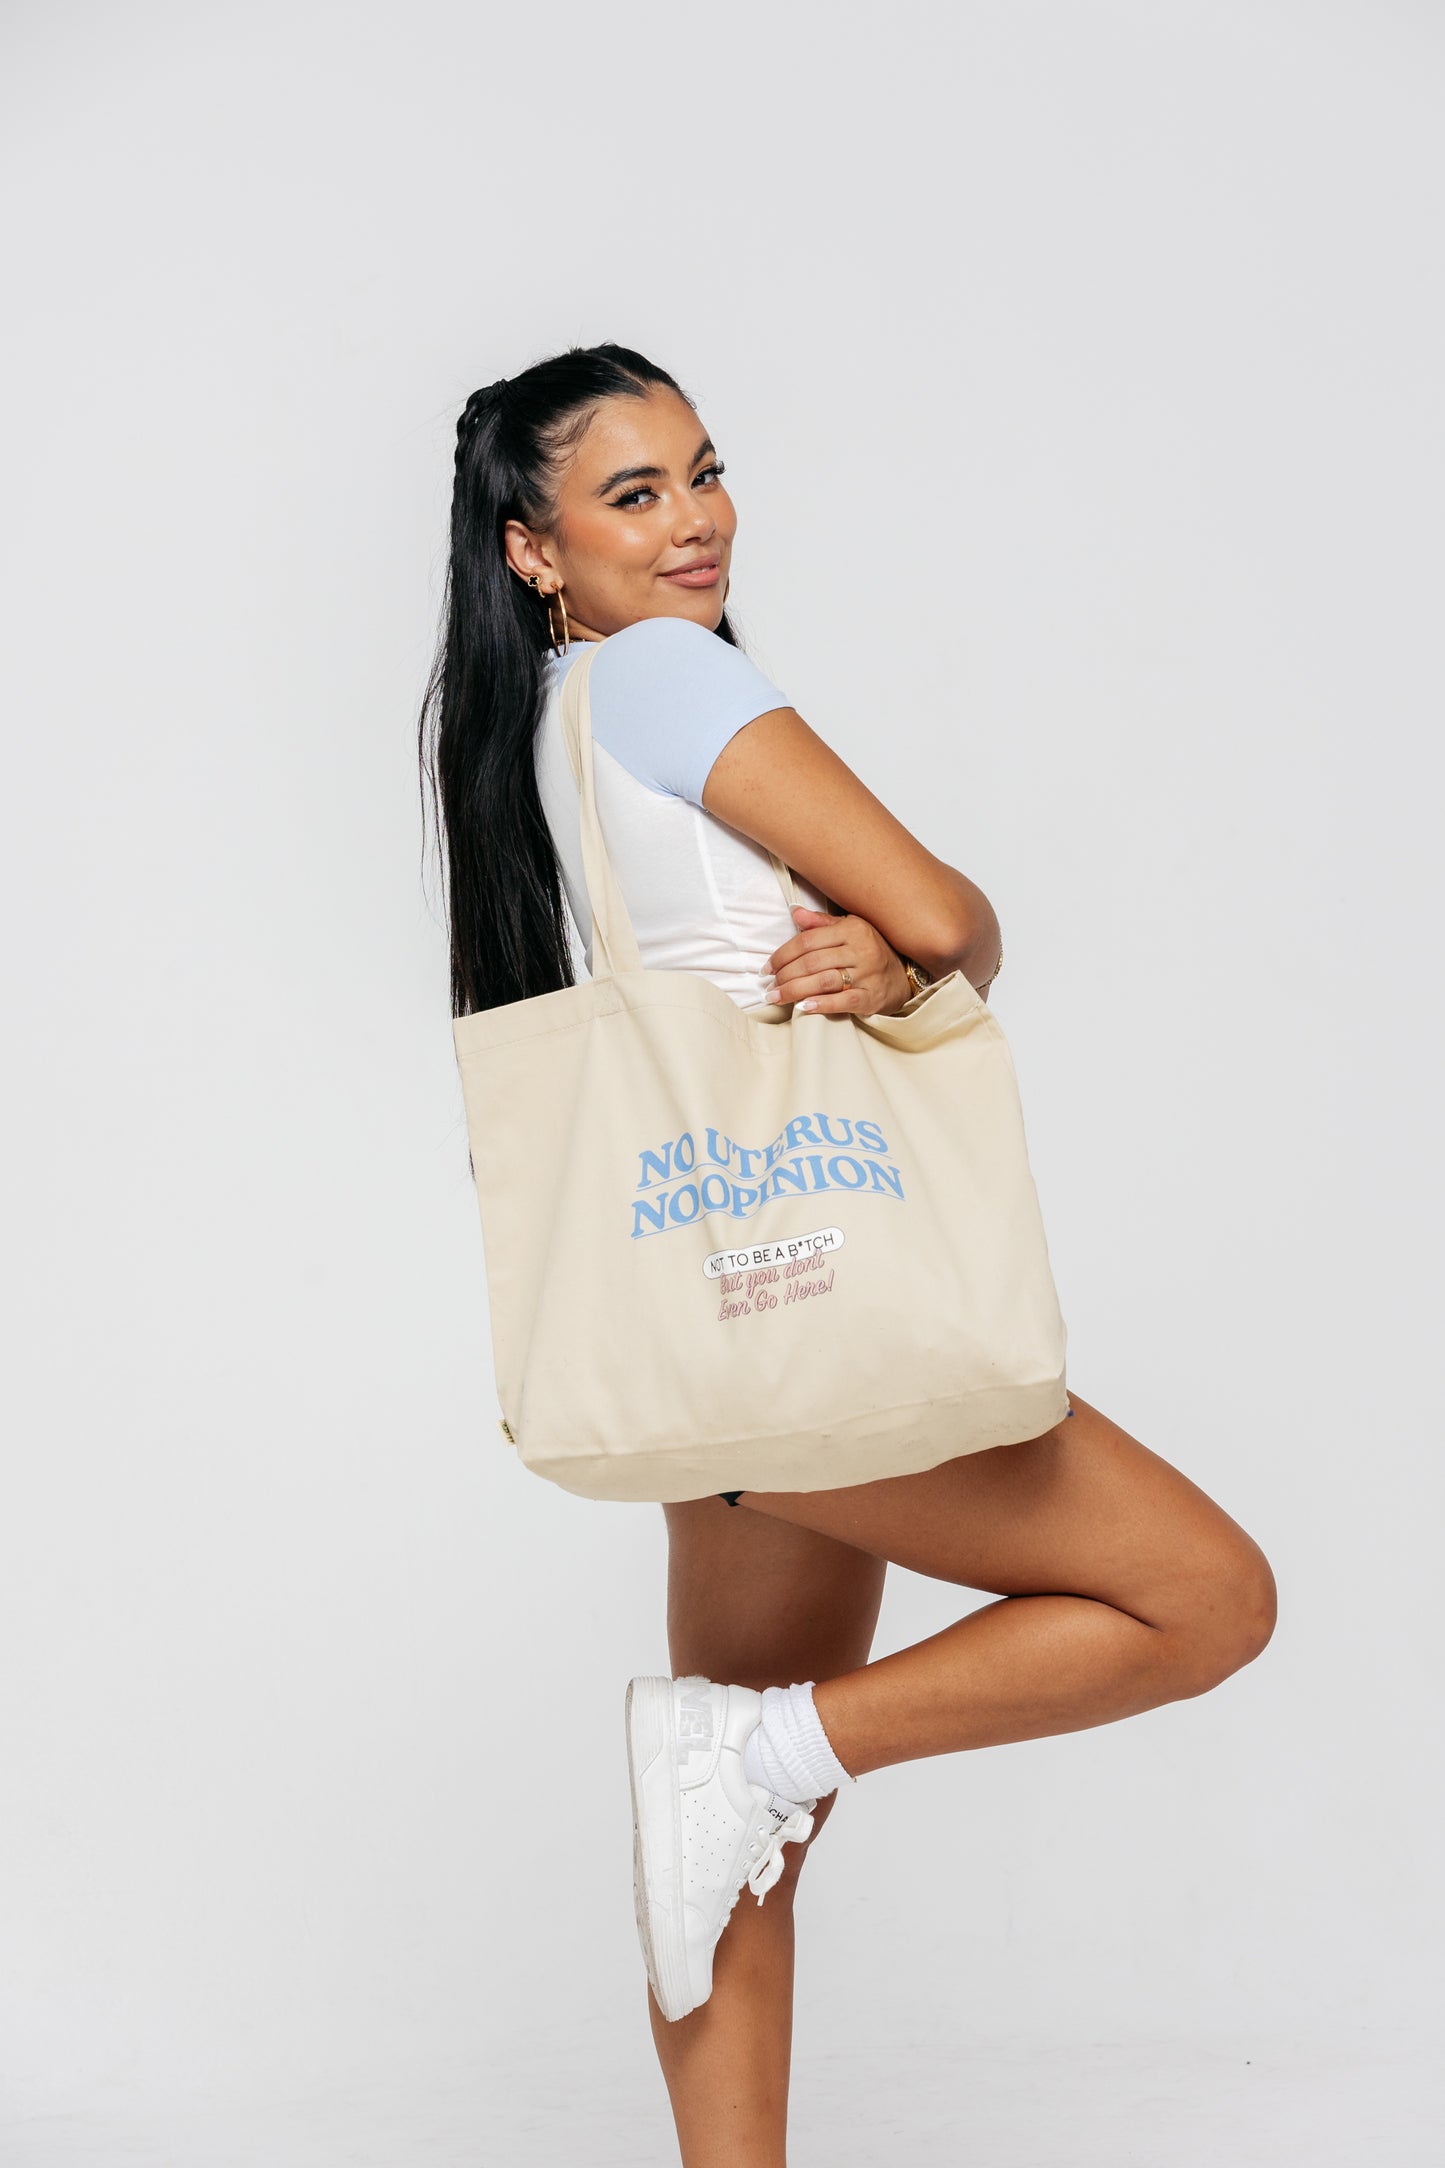 GSG x Itsgpf Got Rights Nude Tote